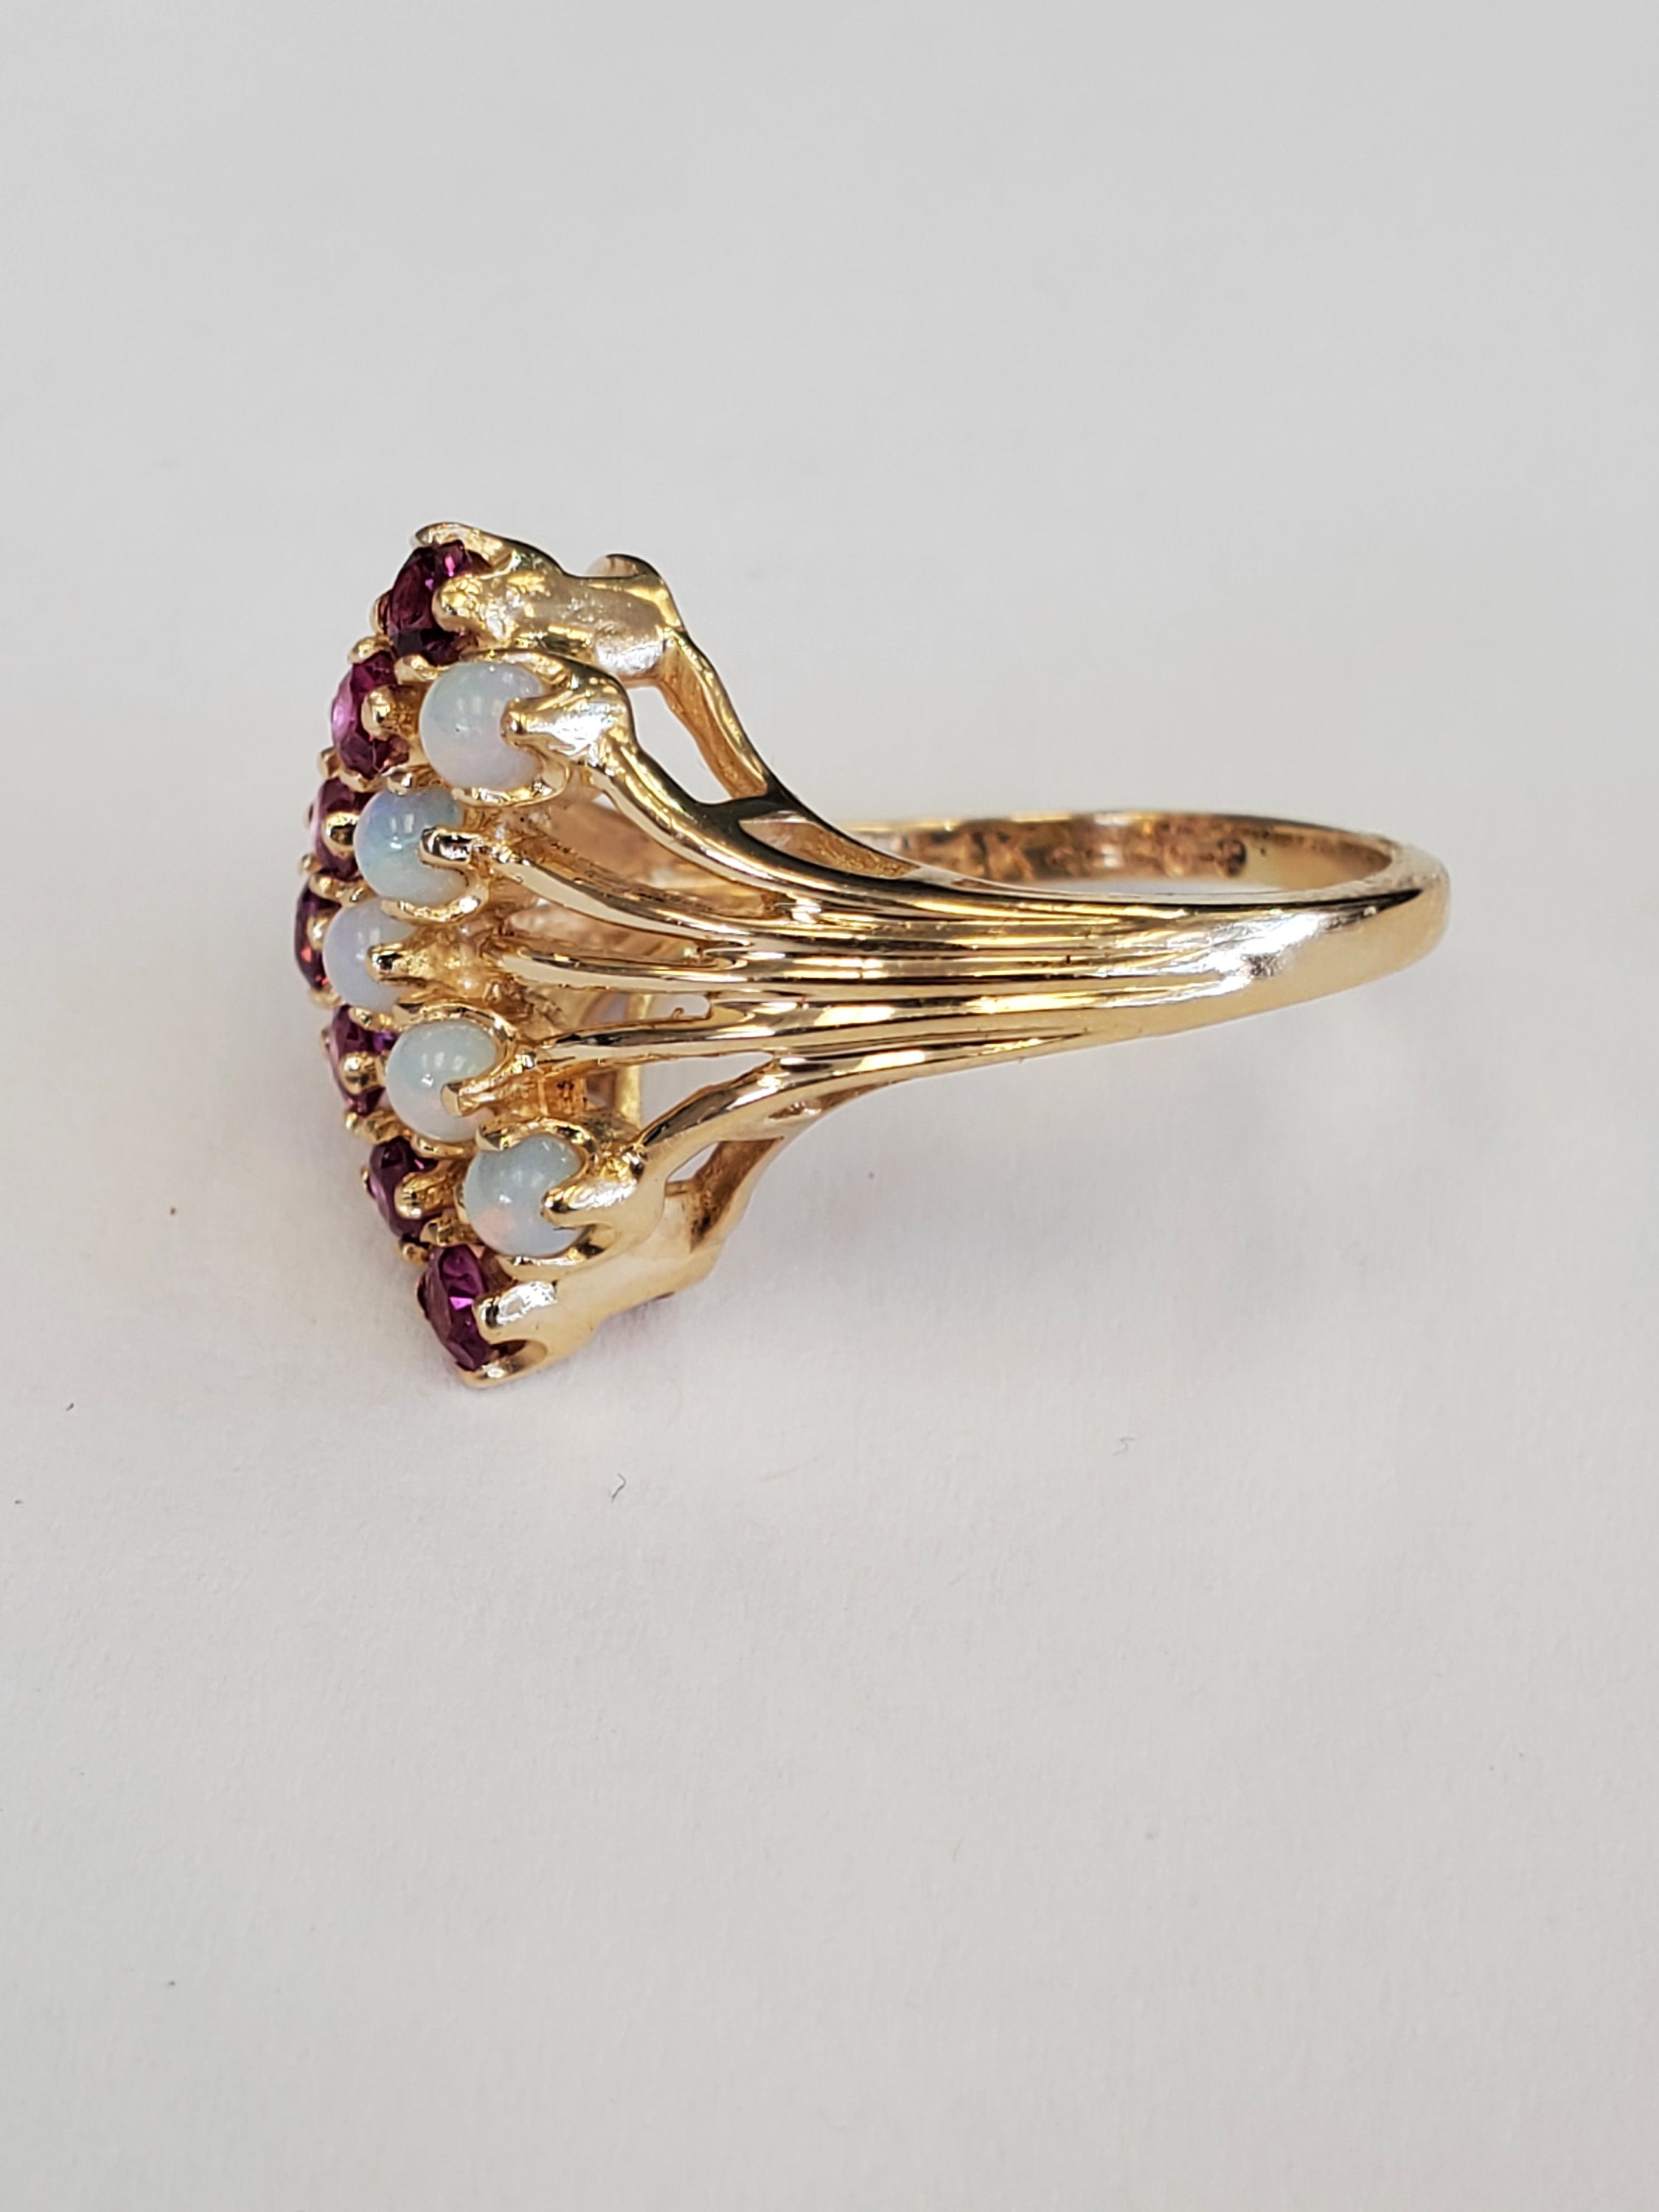 Product Image for SECO Retro ruby and opal 14k yellow gold ring size 4.5 Stein & Ellbogen Co.